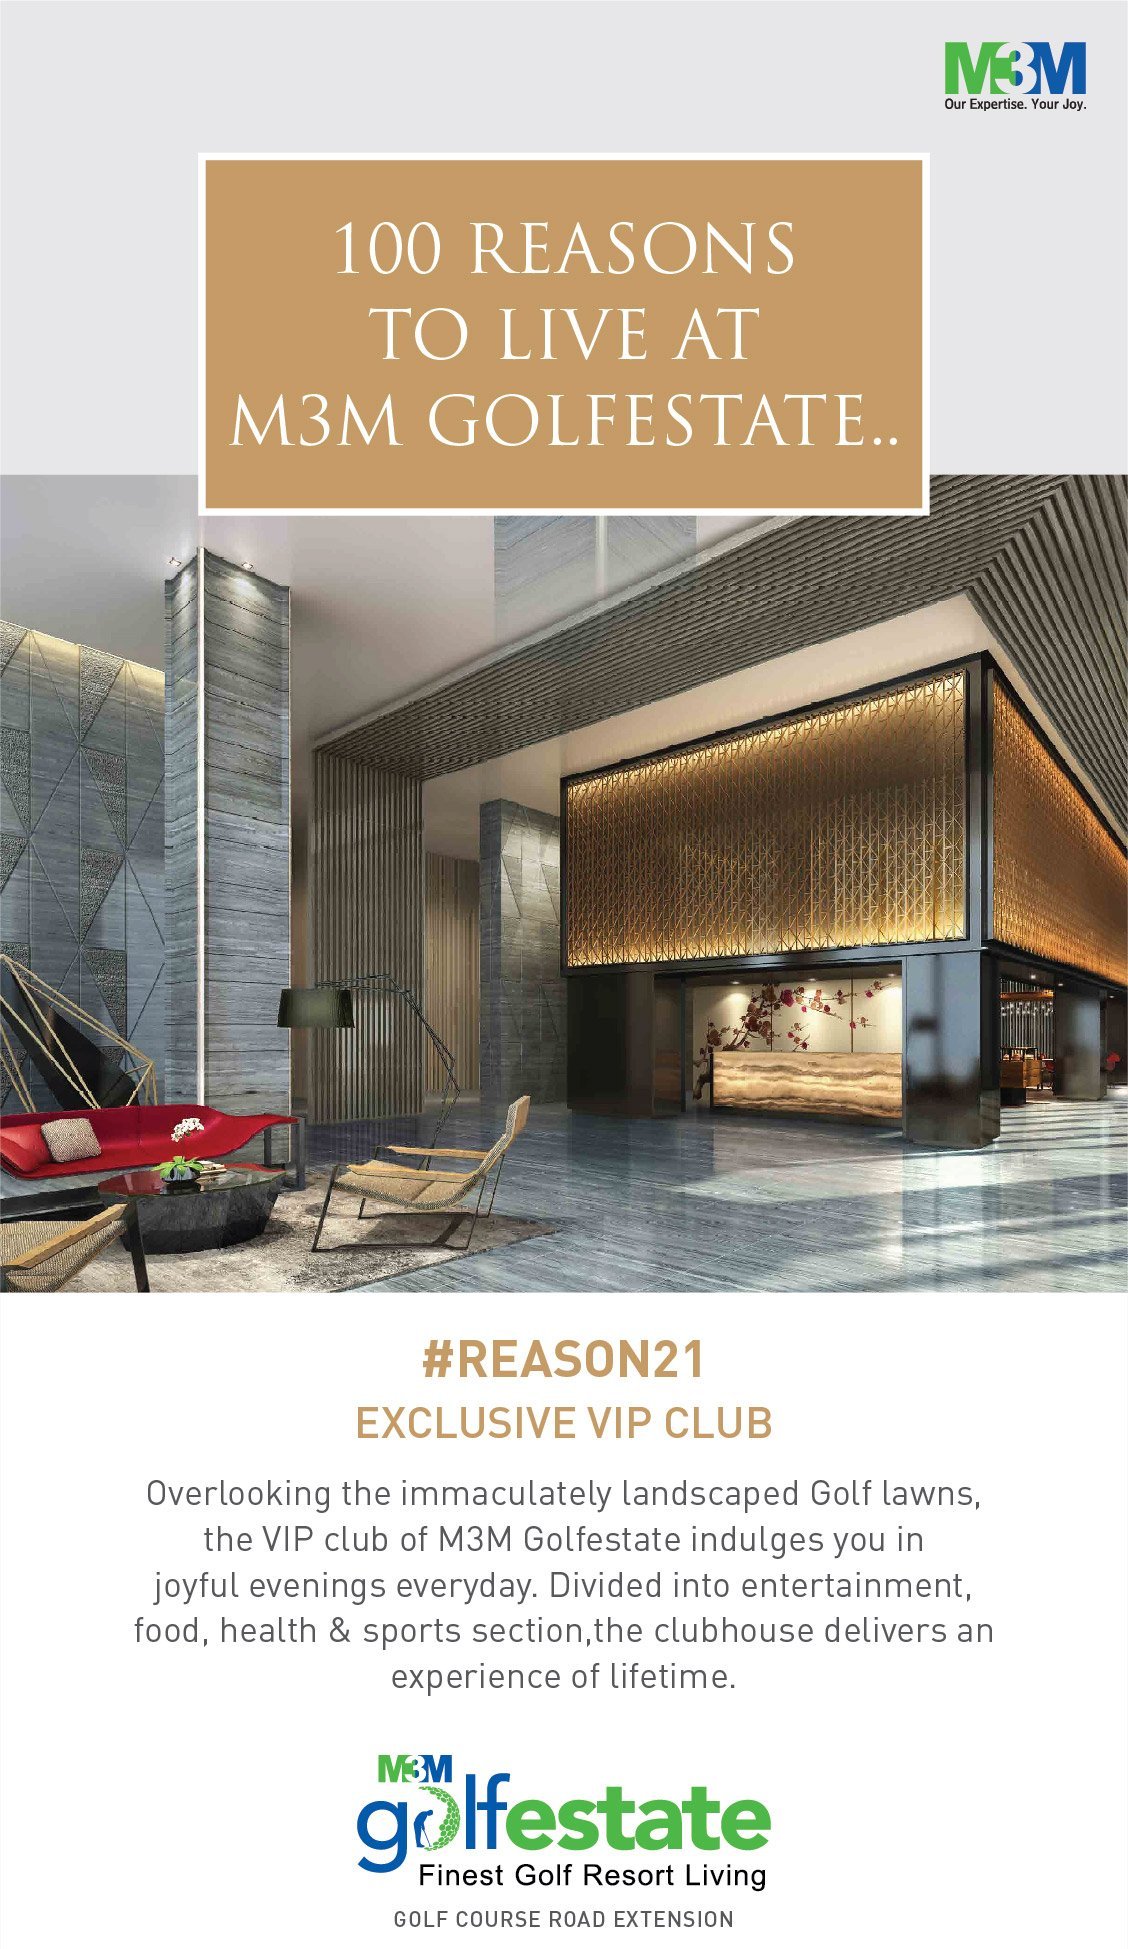 Indulge yourself in joyful evenings everyday with entertainment, food, health & sports at VIP Club in M3M Golf Estate Update